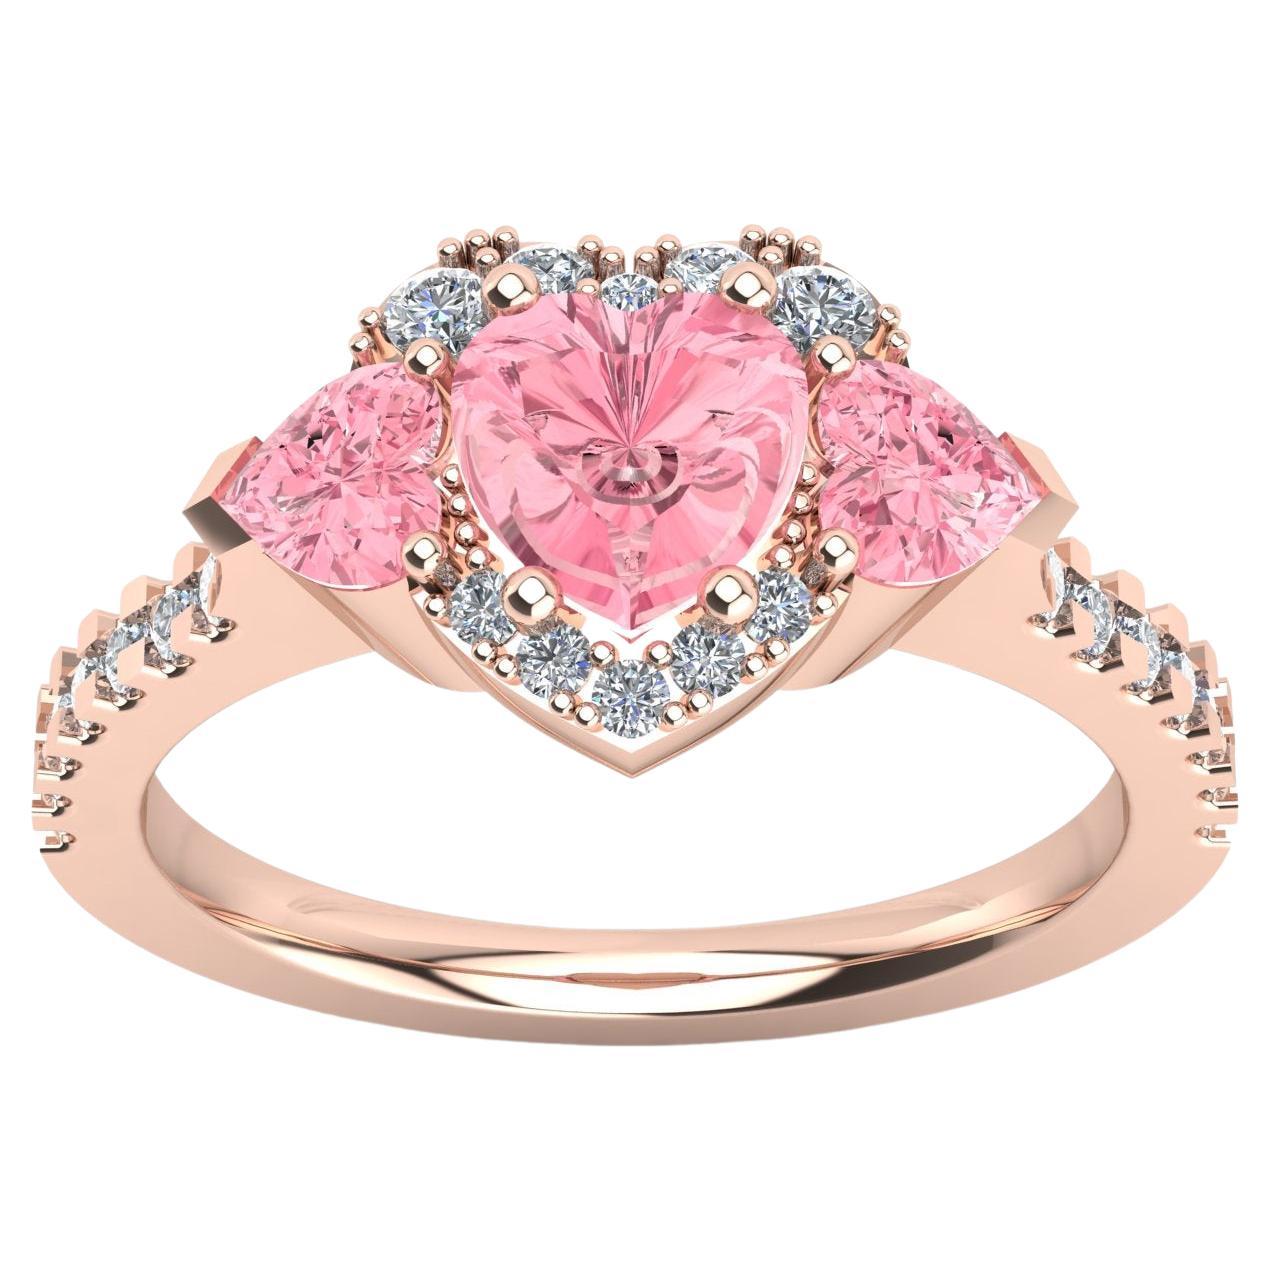 For Sale:  Heart Ring with Pink Sapphires and Diamonds, 18 Karat Rose Gold, Made in Italy